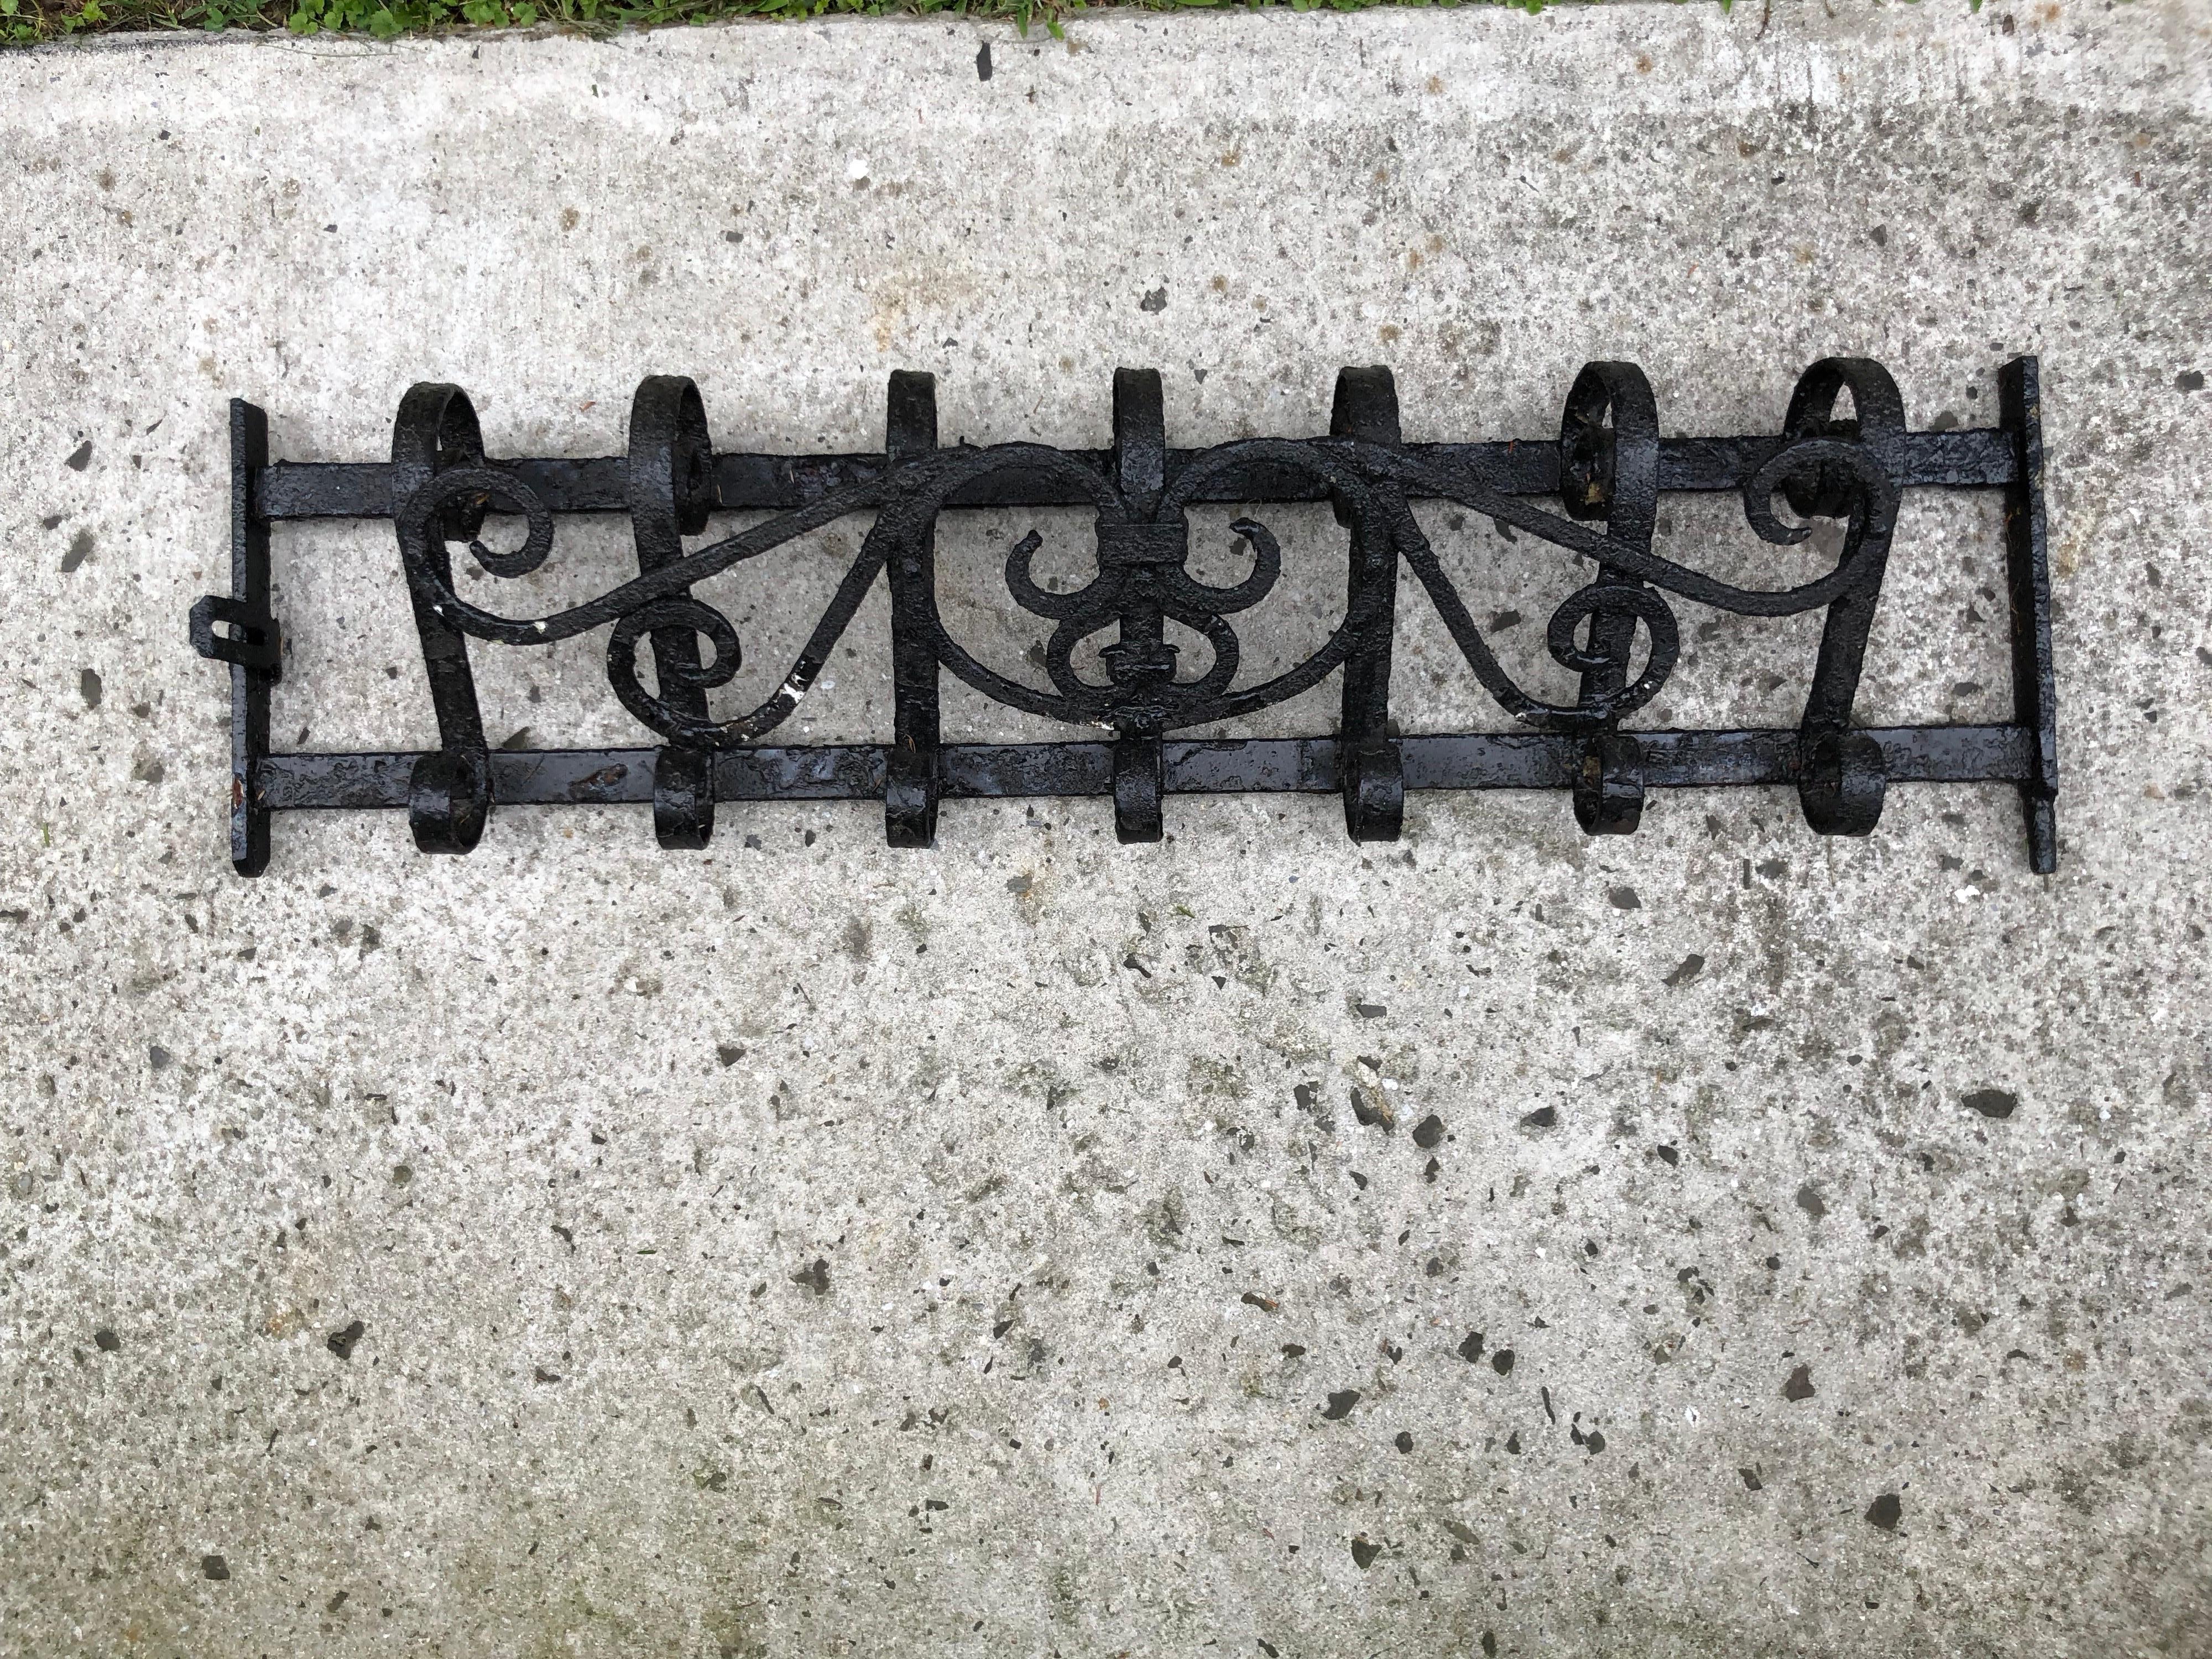 Wrought iron antique wall mount coat rack. Looking for a unique statement piece then this is it. Originally an ornate designed fragment from a window terrace or fence. Heavy and requires special hardware to mount to a sheetrock wall. Can also be